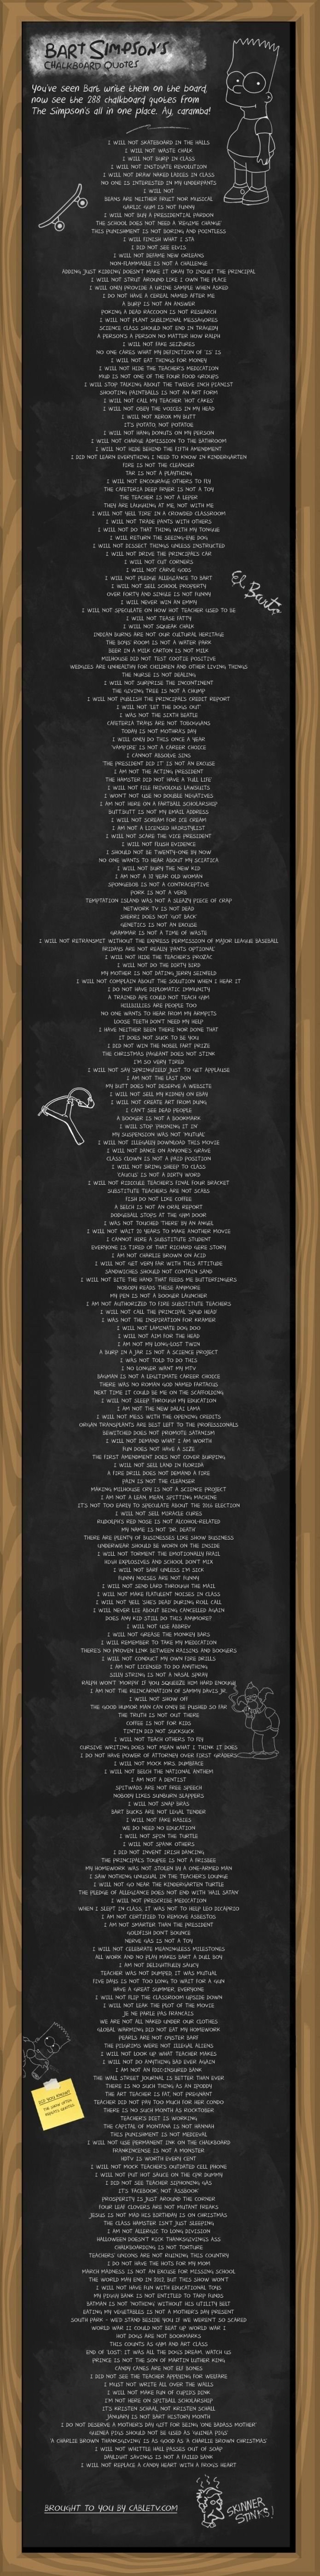 Every single one of Bart Simpson's chalkboard quotes.